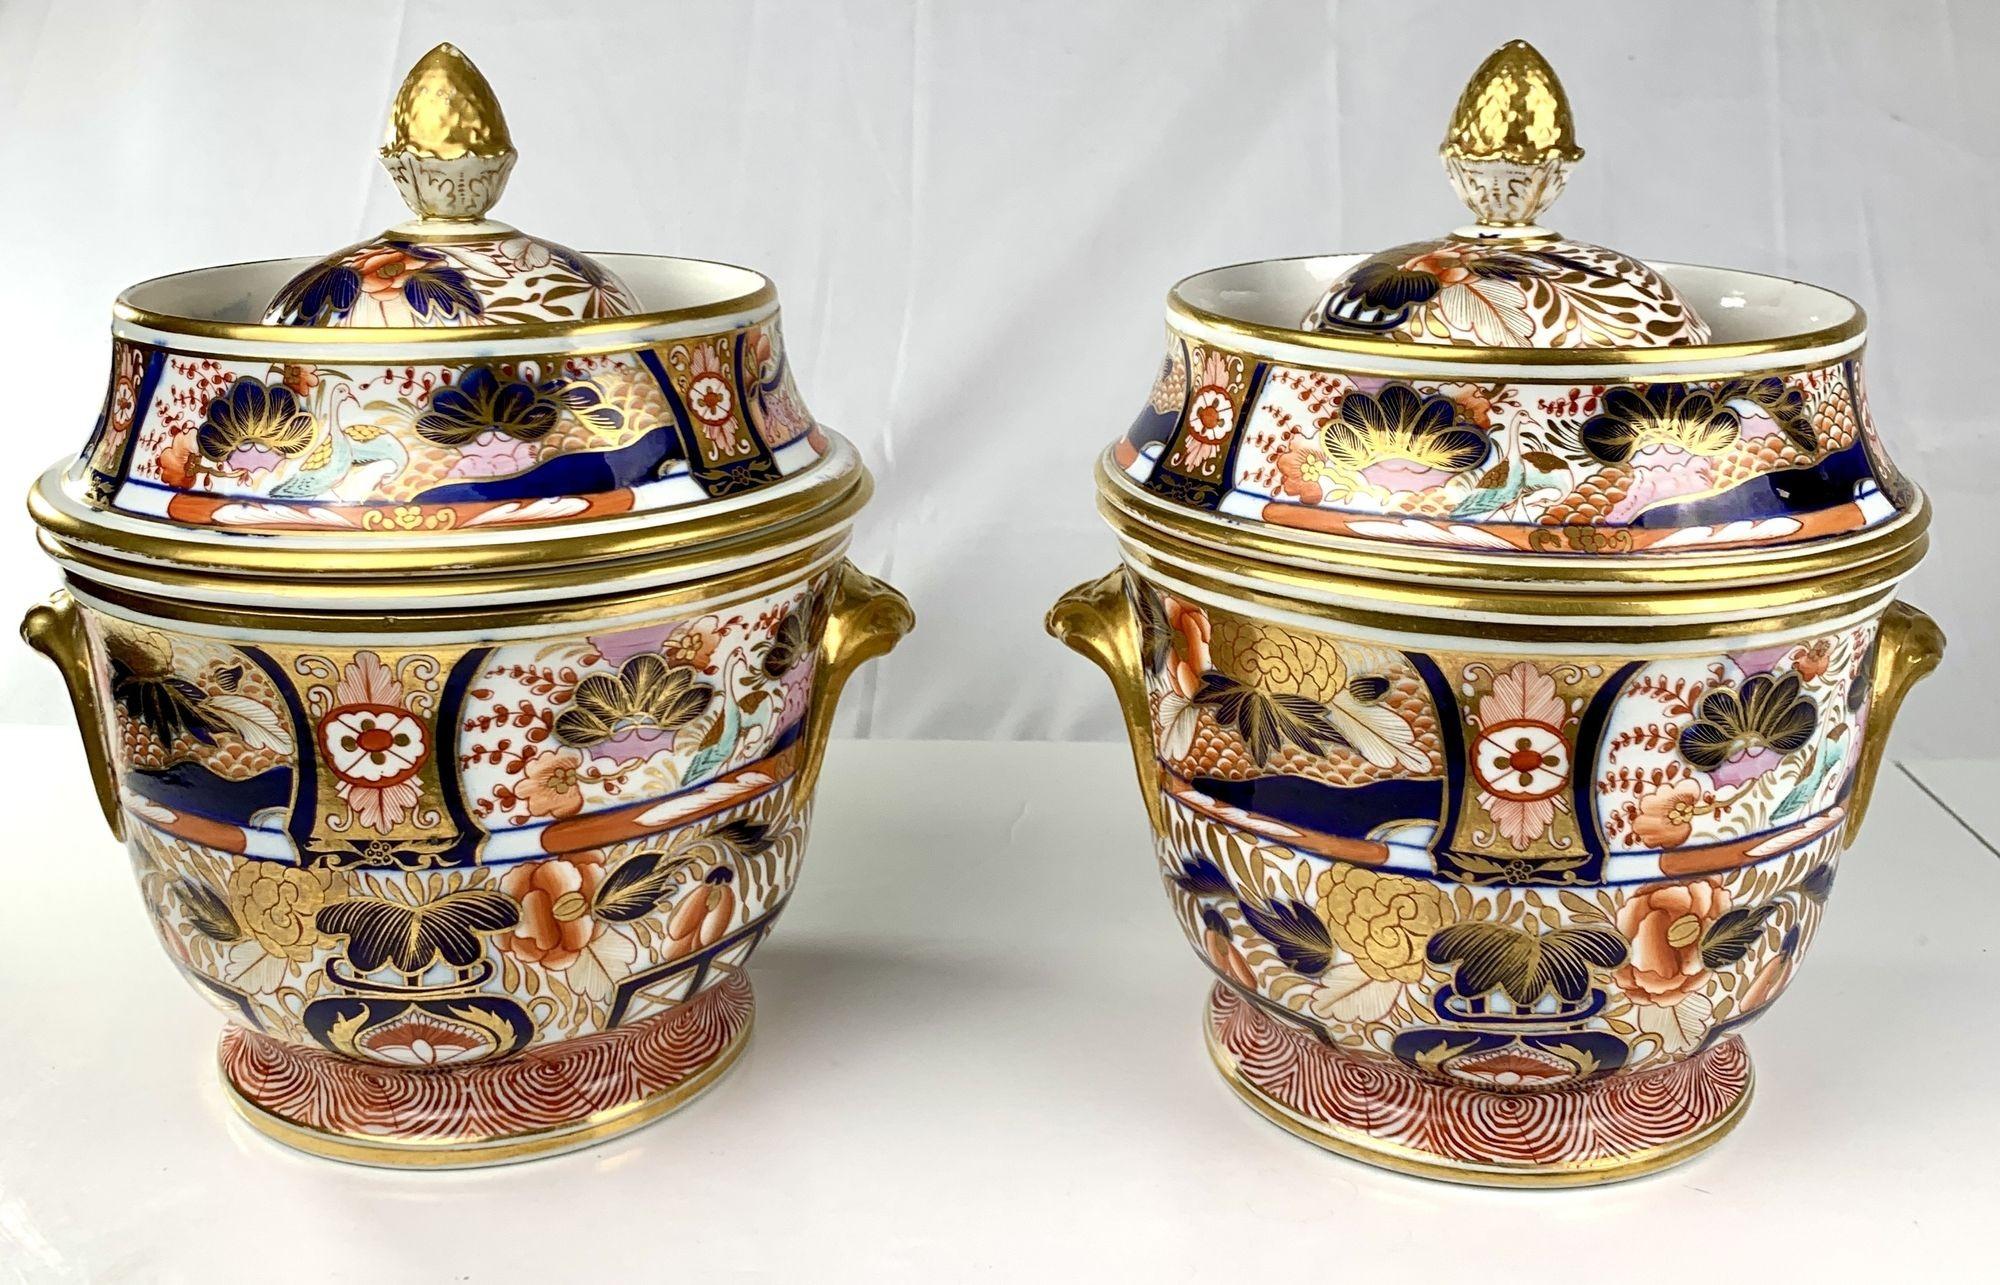  Coalport Porcelain made this fabulous pair of Admiral Nelson pattern ice pails circa 1810.   The intensity of the Imari colors on the Admiral Nelson pattern is quite remarkable. 
It is the epitome of Regency decoration.  
Hand-painted in England,